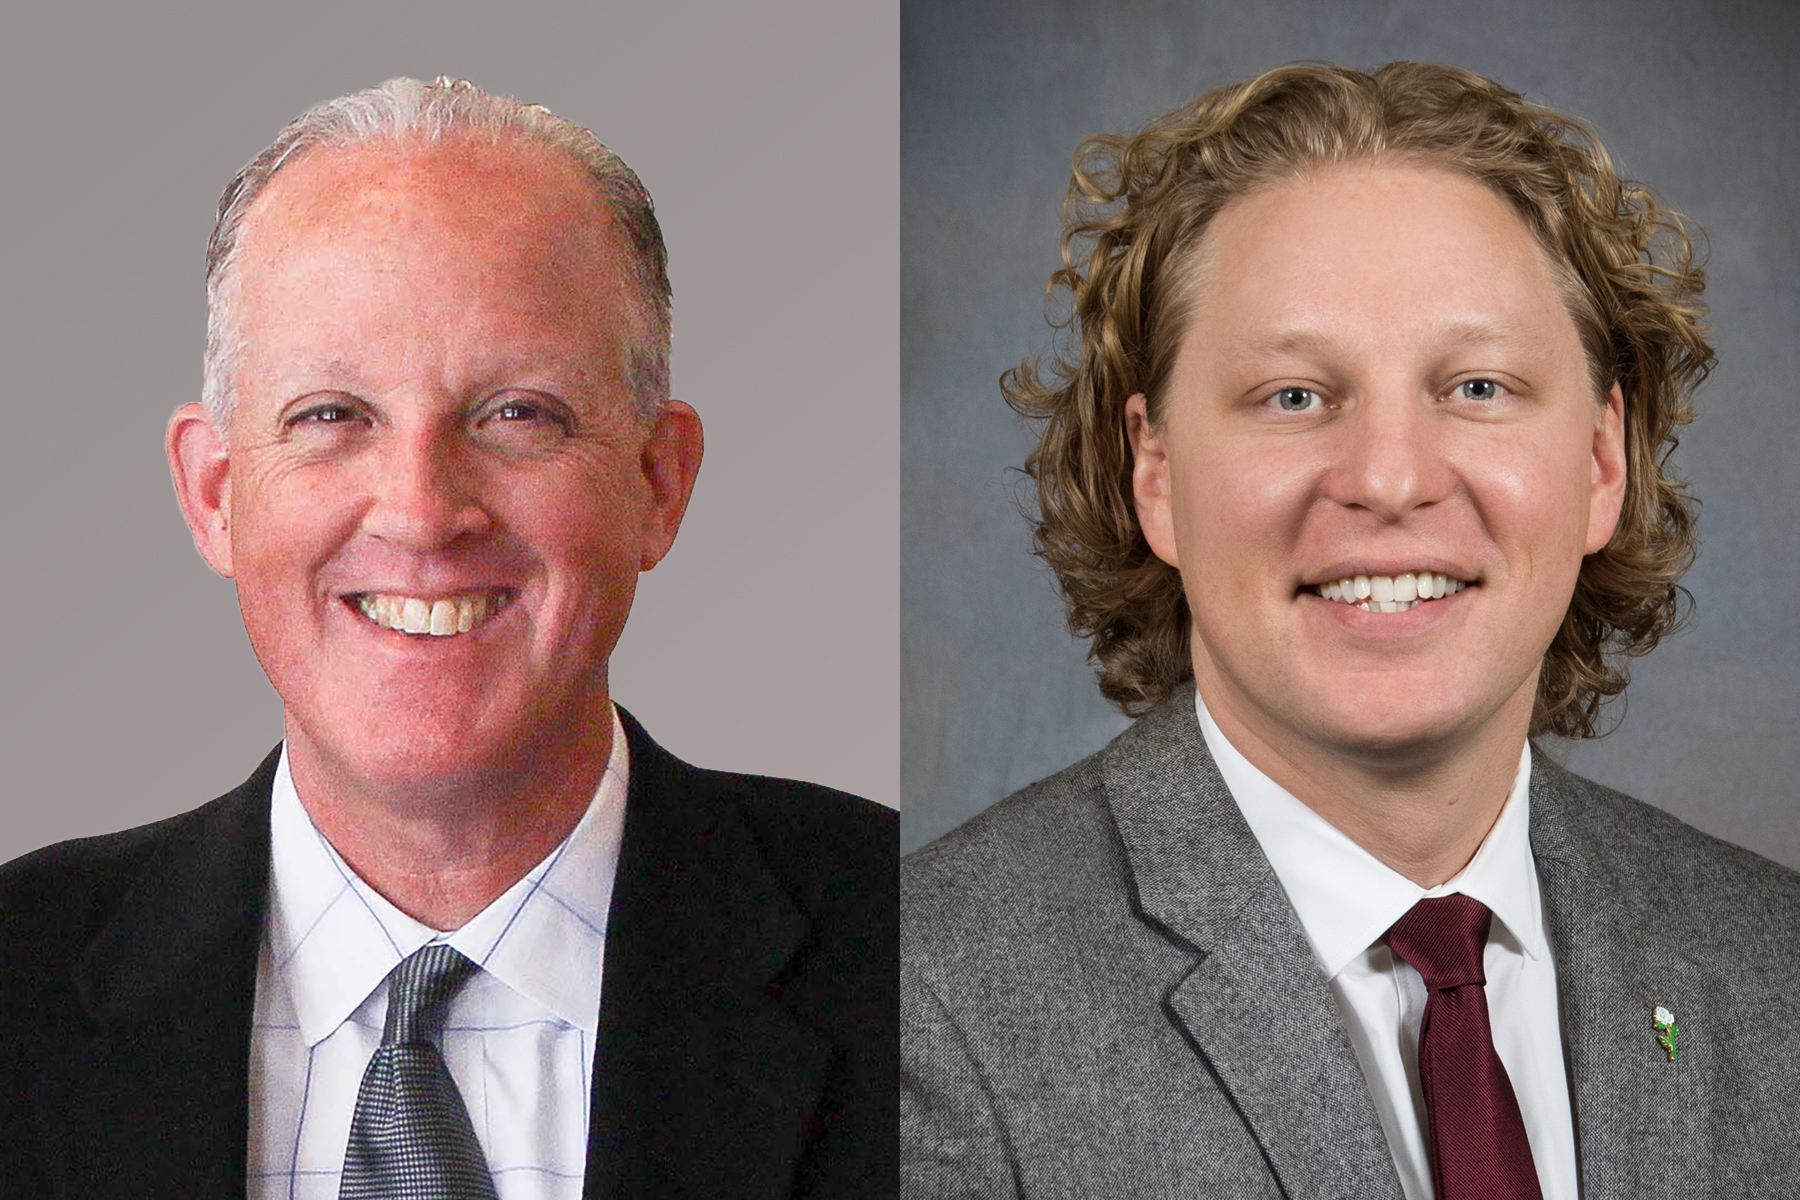 Menzer and Schreiber Nominated for Board of Directors